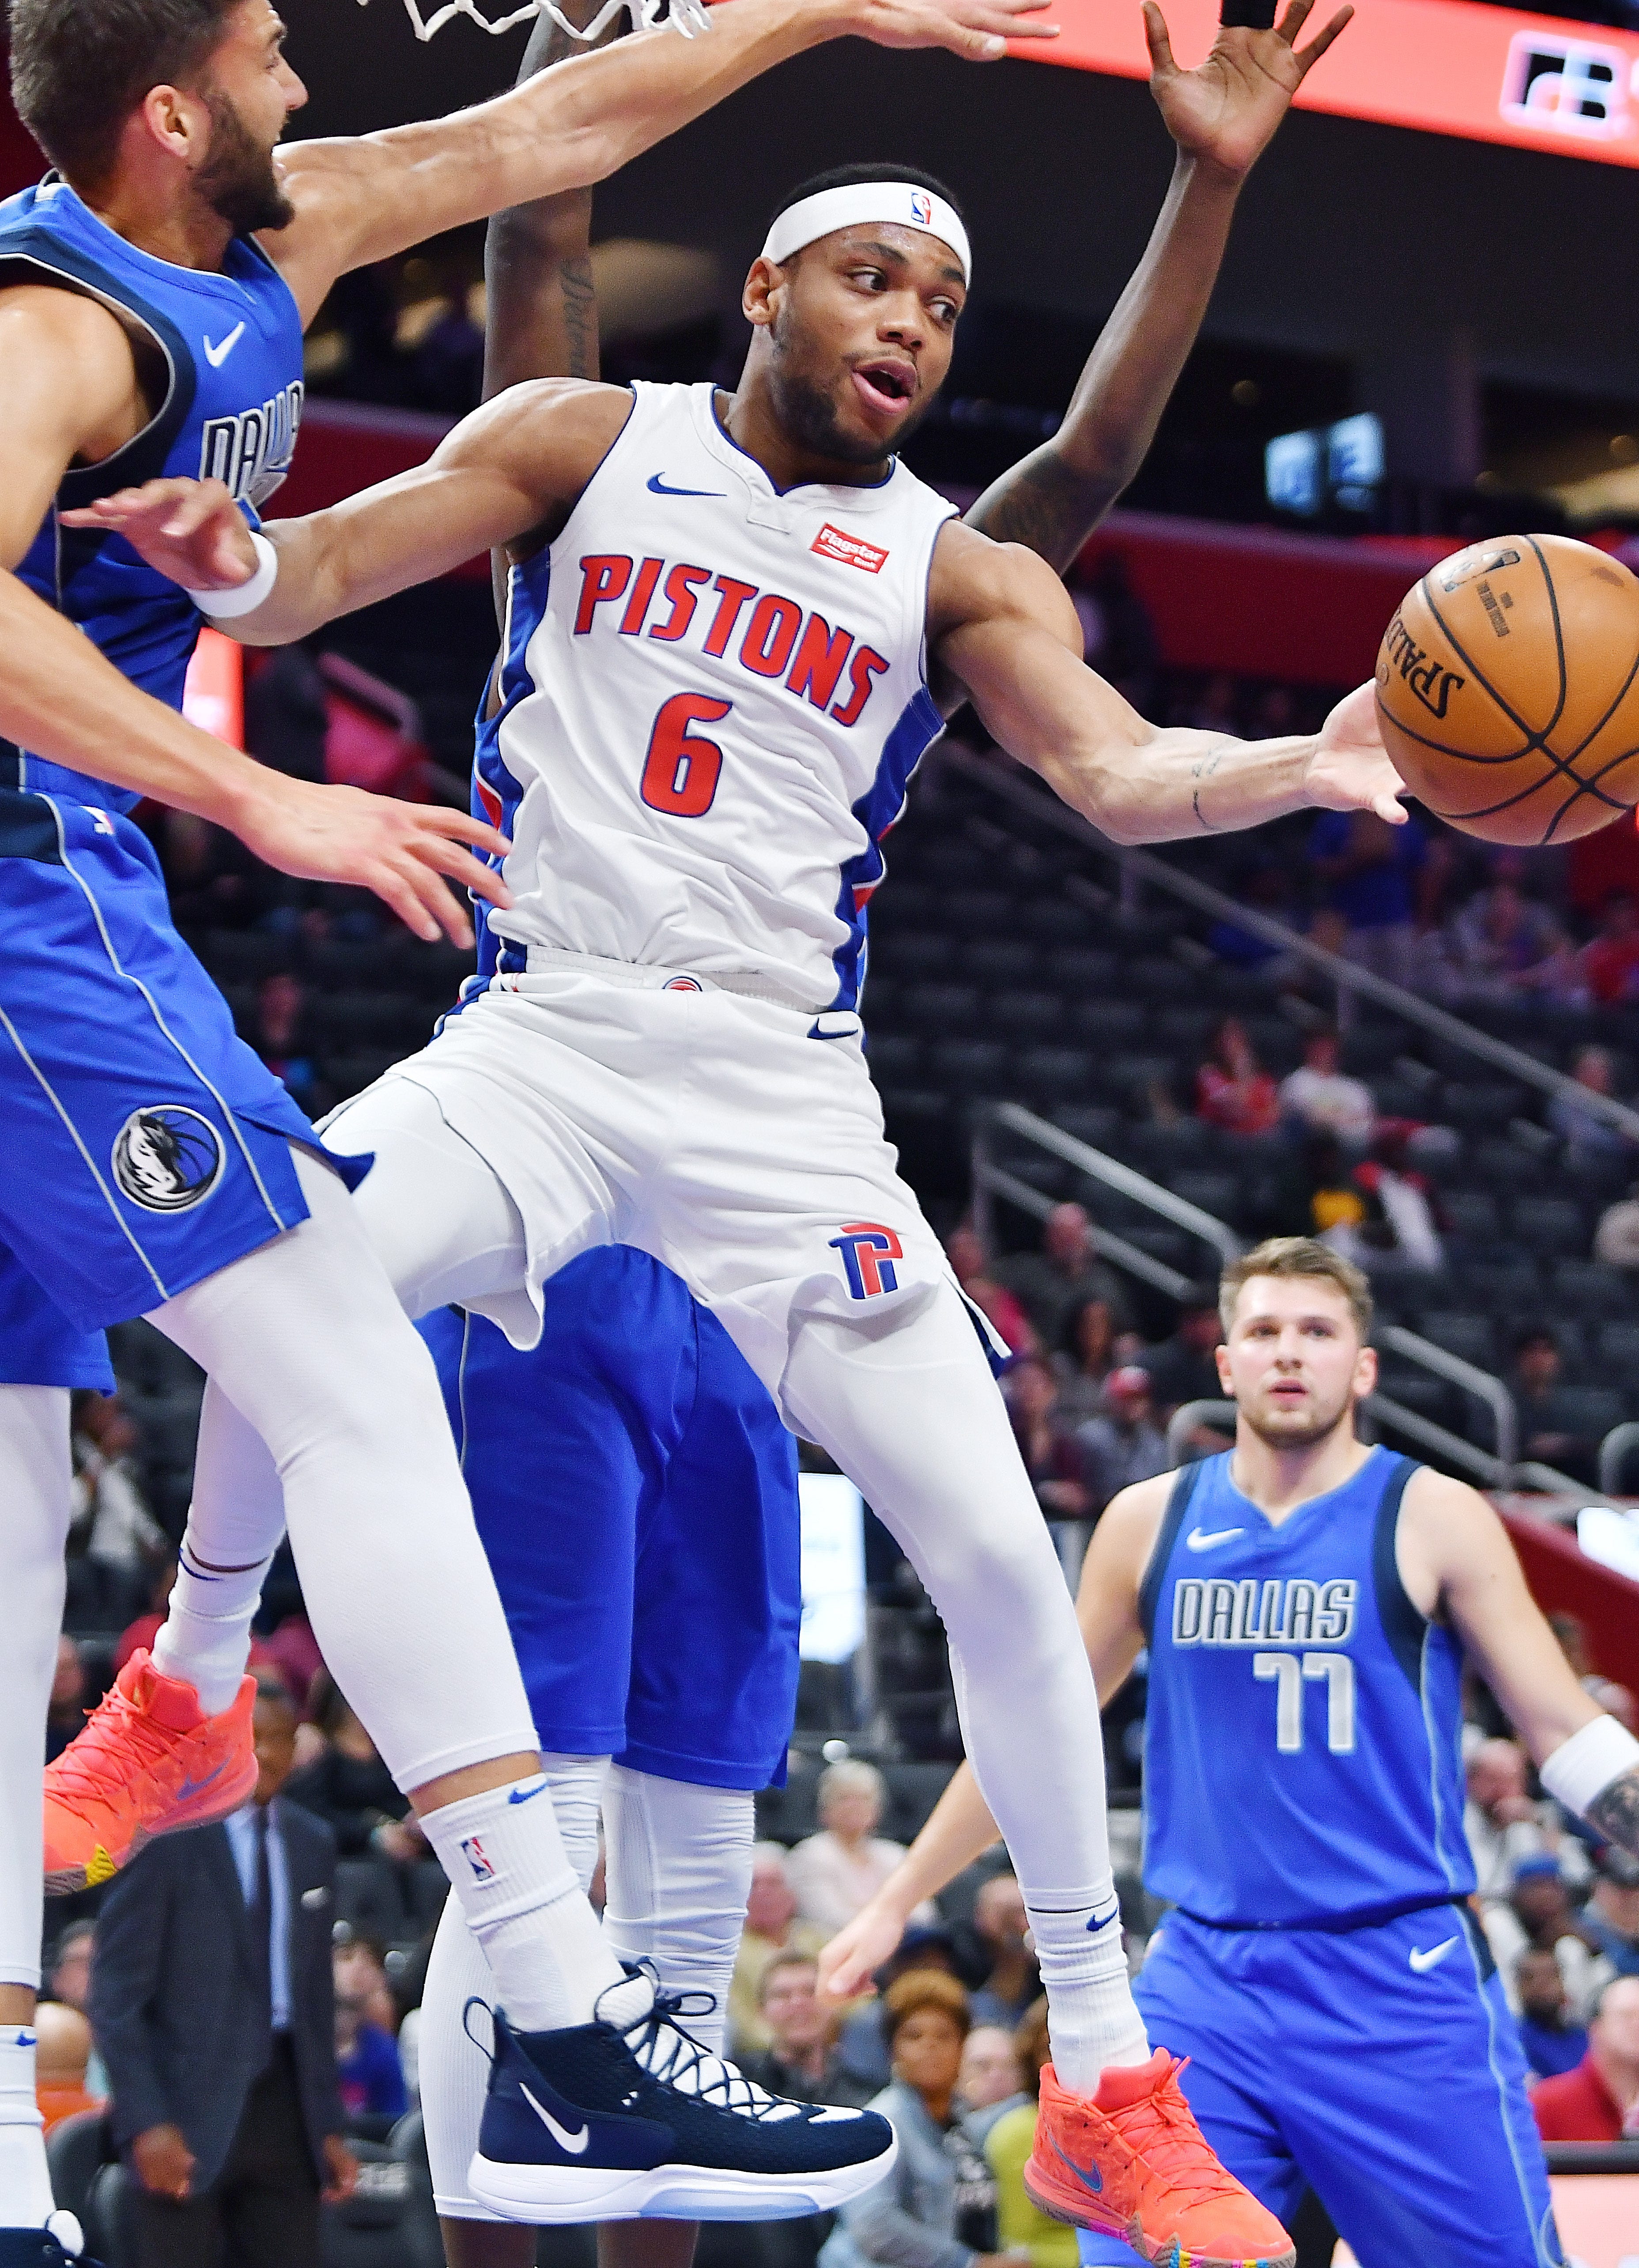 Bruce Brown: Age: 23. Ht: 6-5. Wt: 202. 2018-19 stats: 4.3 pts, 2.5 rebs, 26% 3FG. Outlook: Brown became a fixture in the starting lineup as a rookie but will need to pick up his 3-point shooting and finish better at the rim. He ’ s worked to become a better ballhandler and facilitator, which could earn him more playing time.